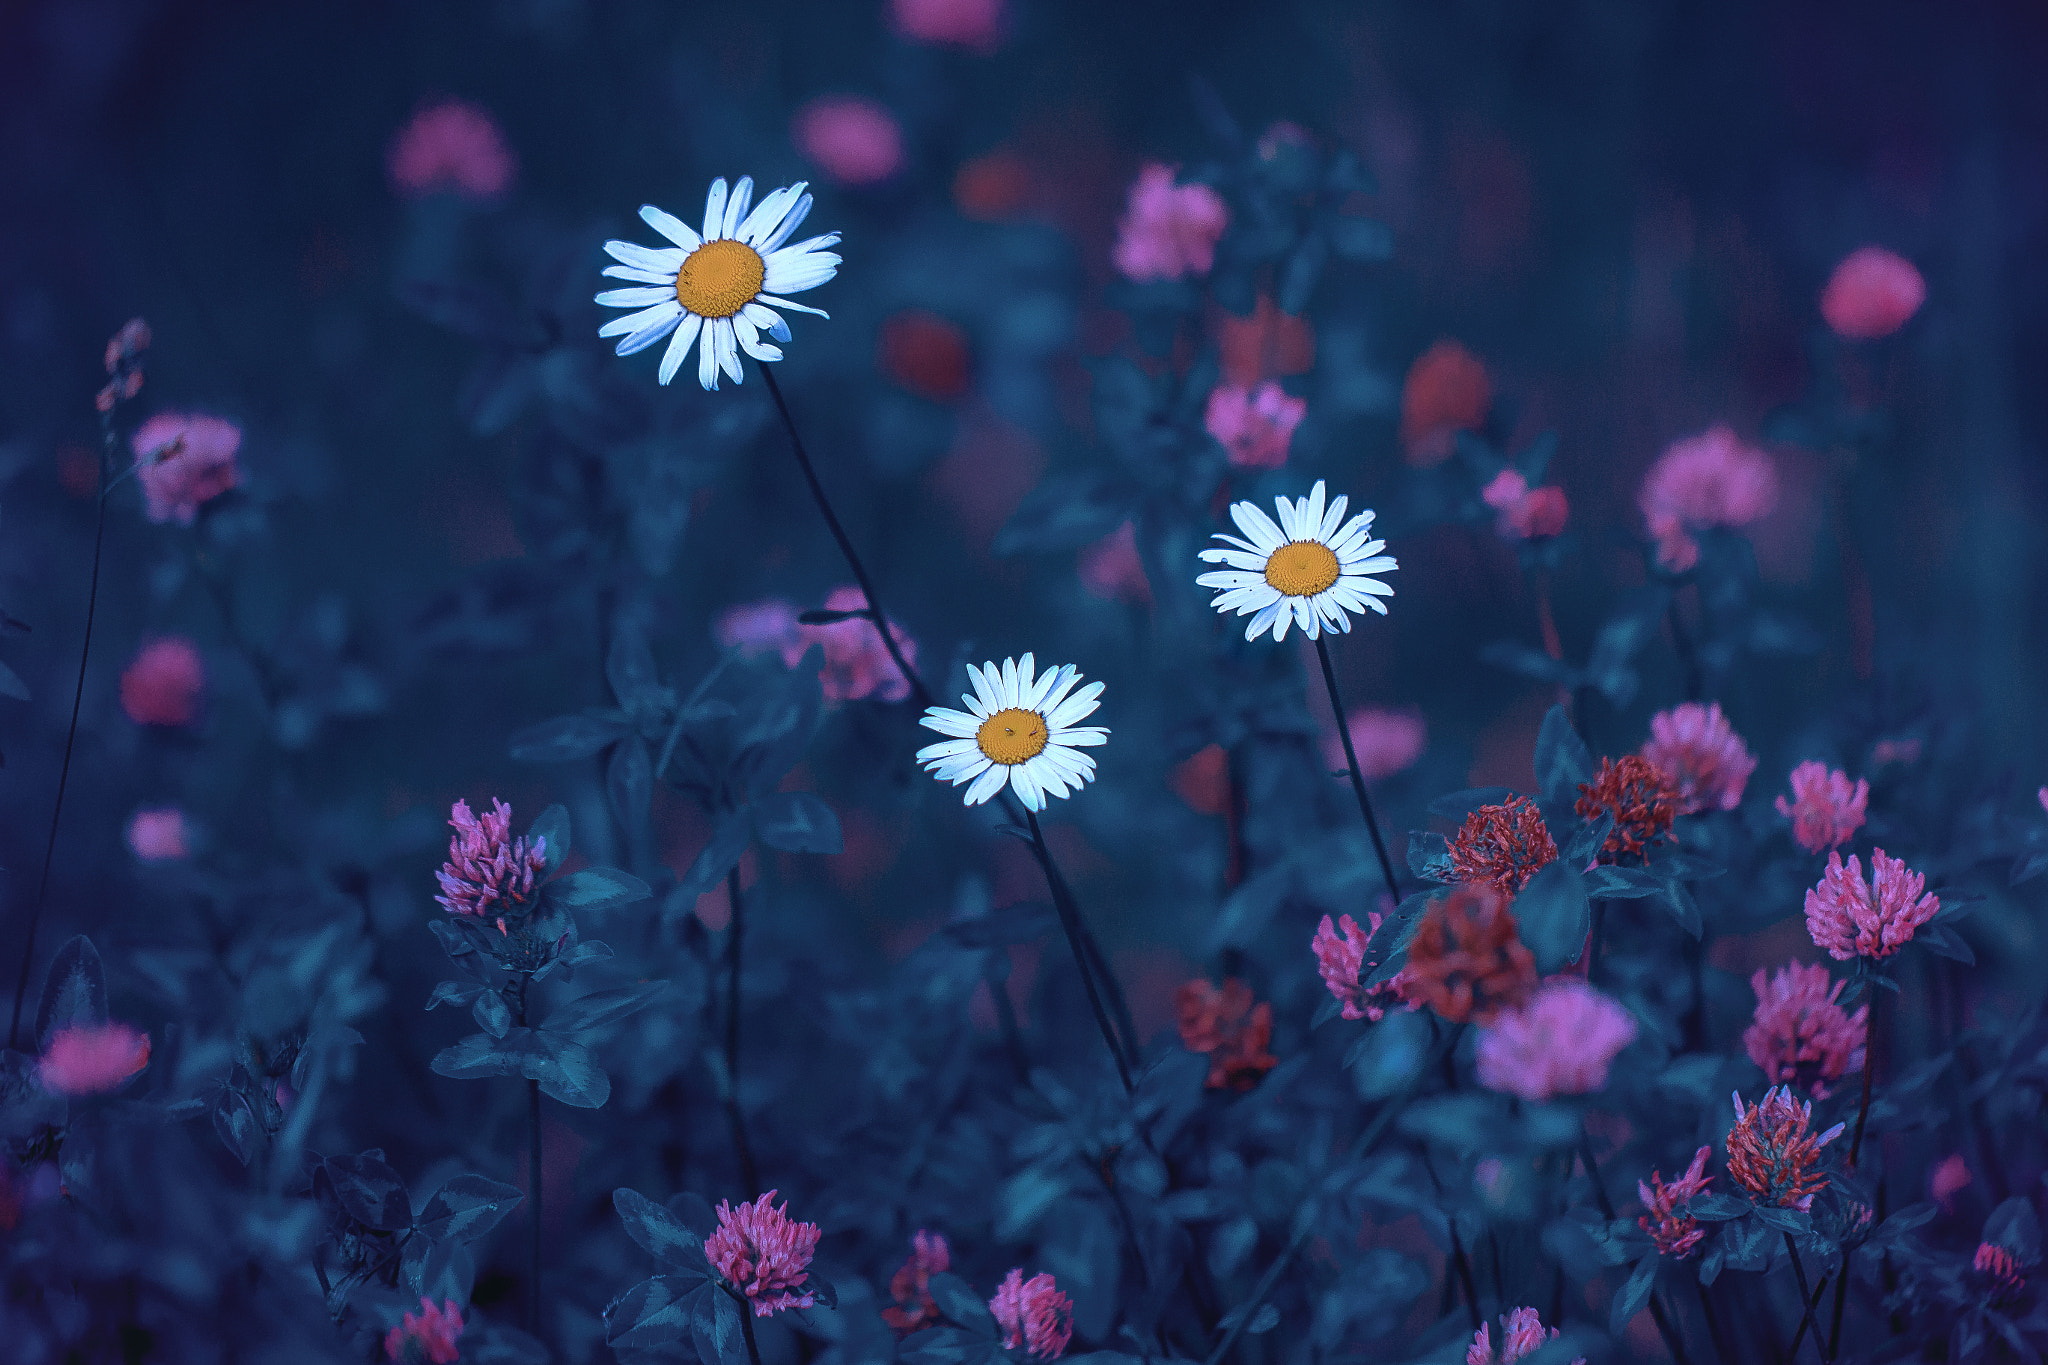 Andrey Metelkov Blue White Flowers Nature Plants 500px 2048x1365